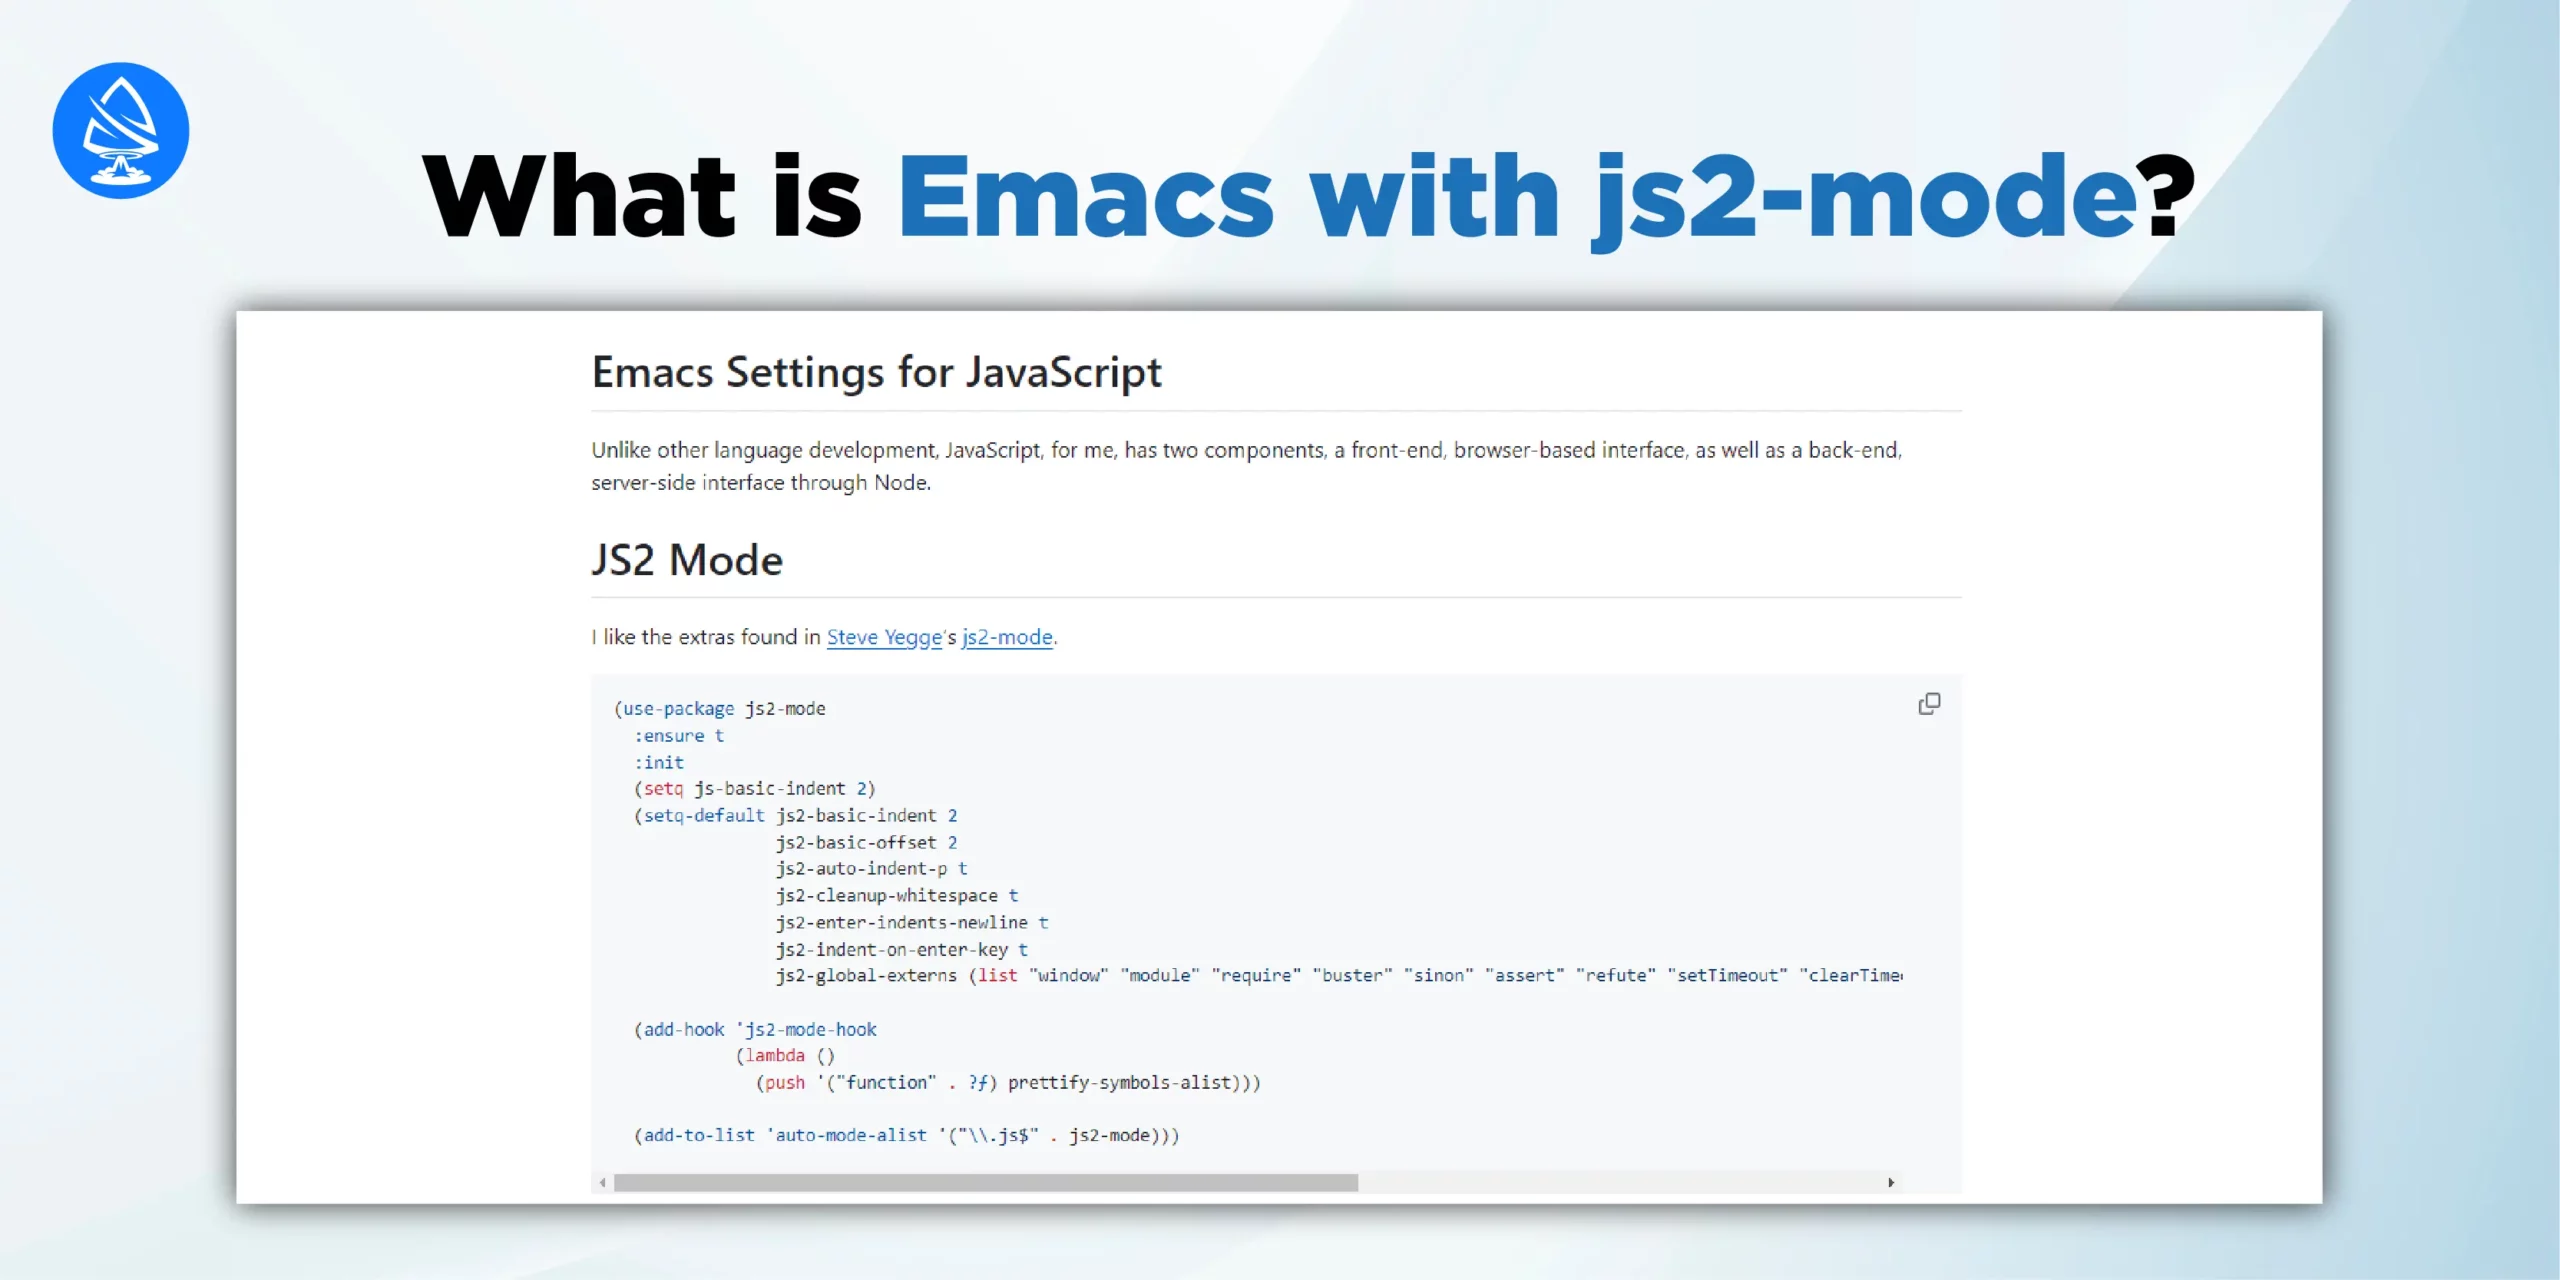 Emacs with js2-mode